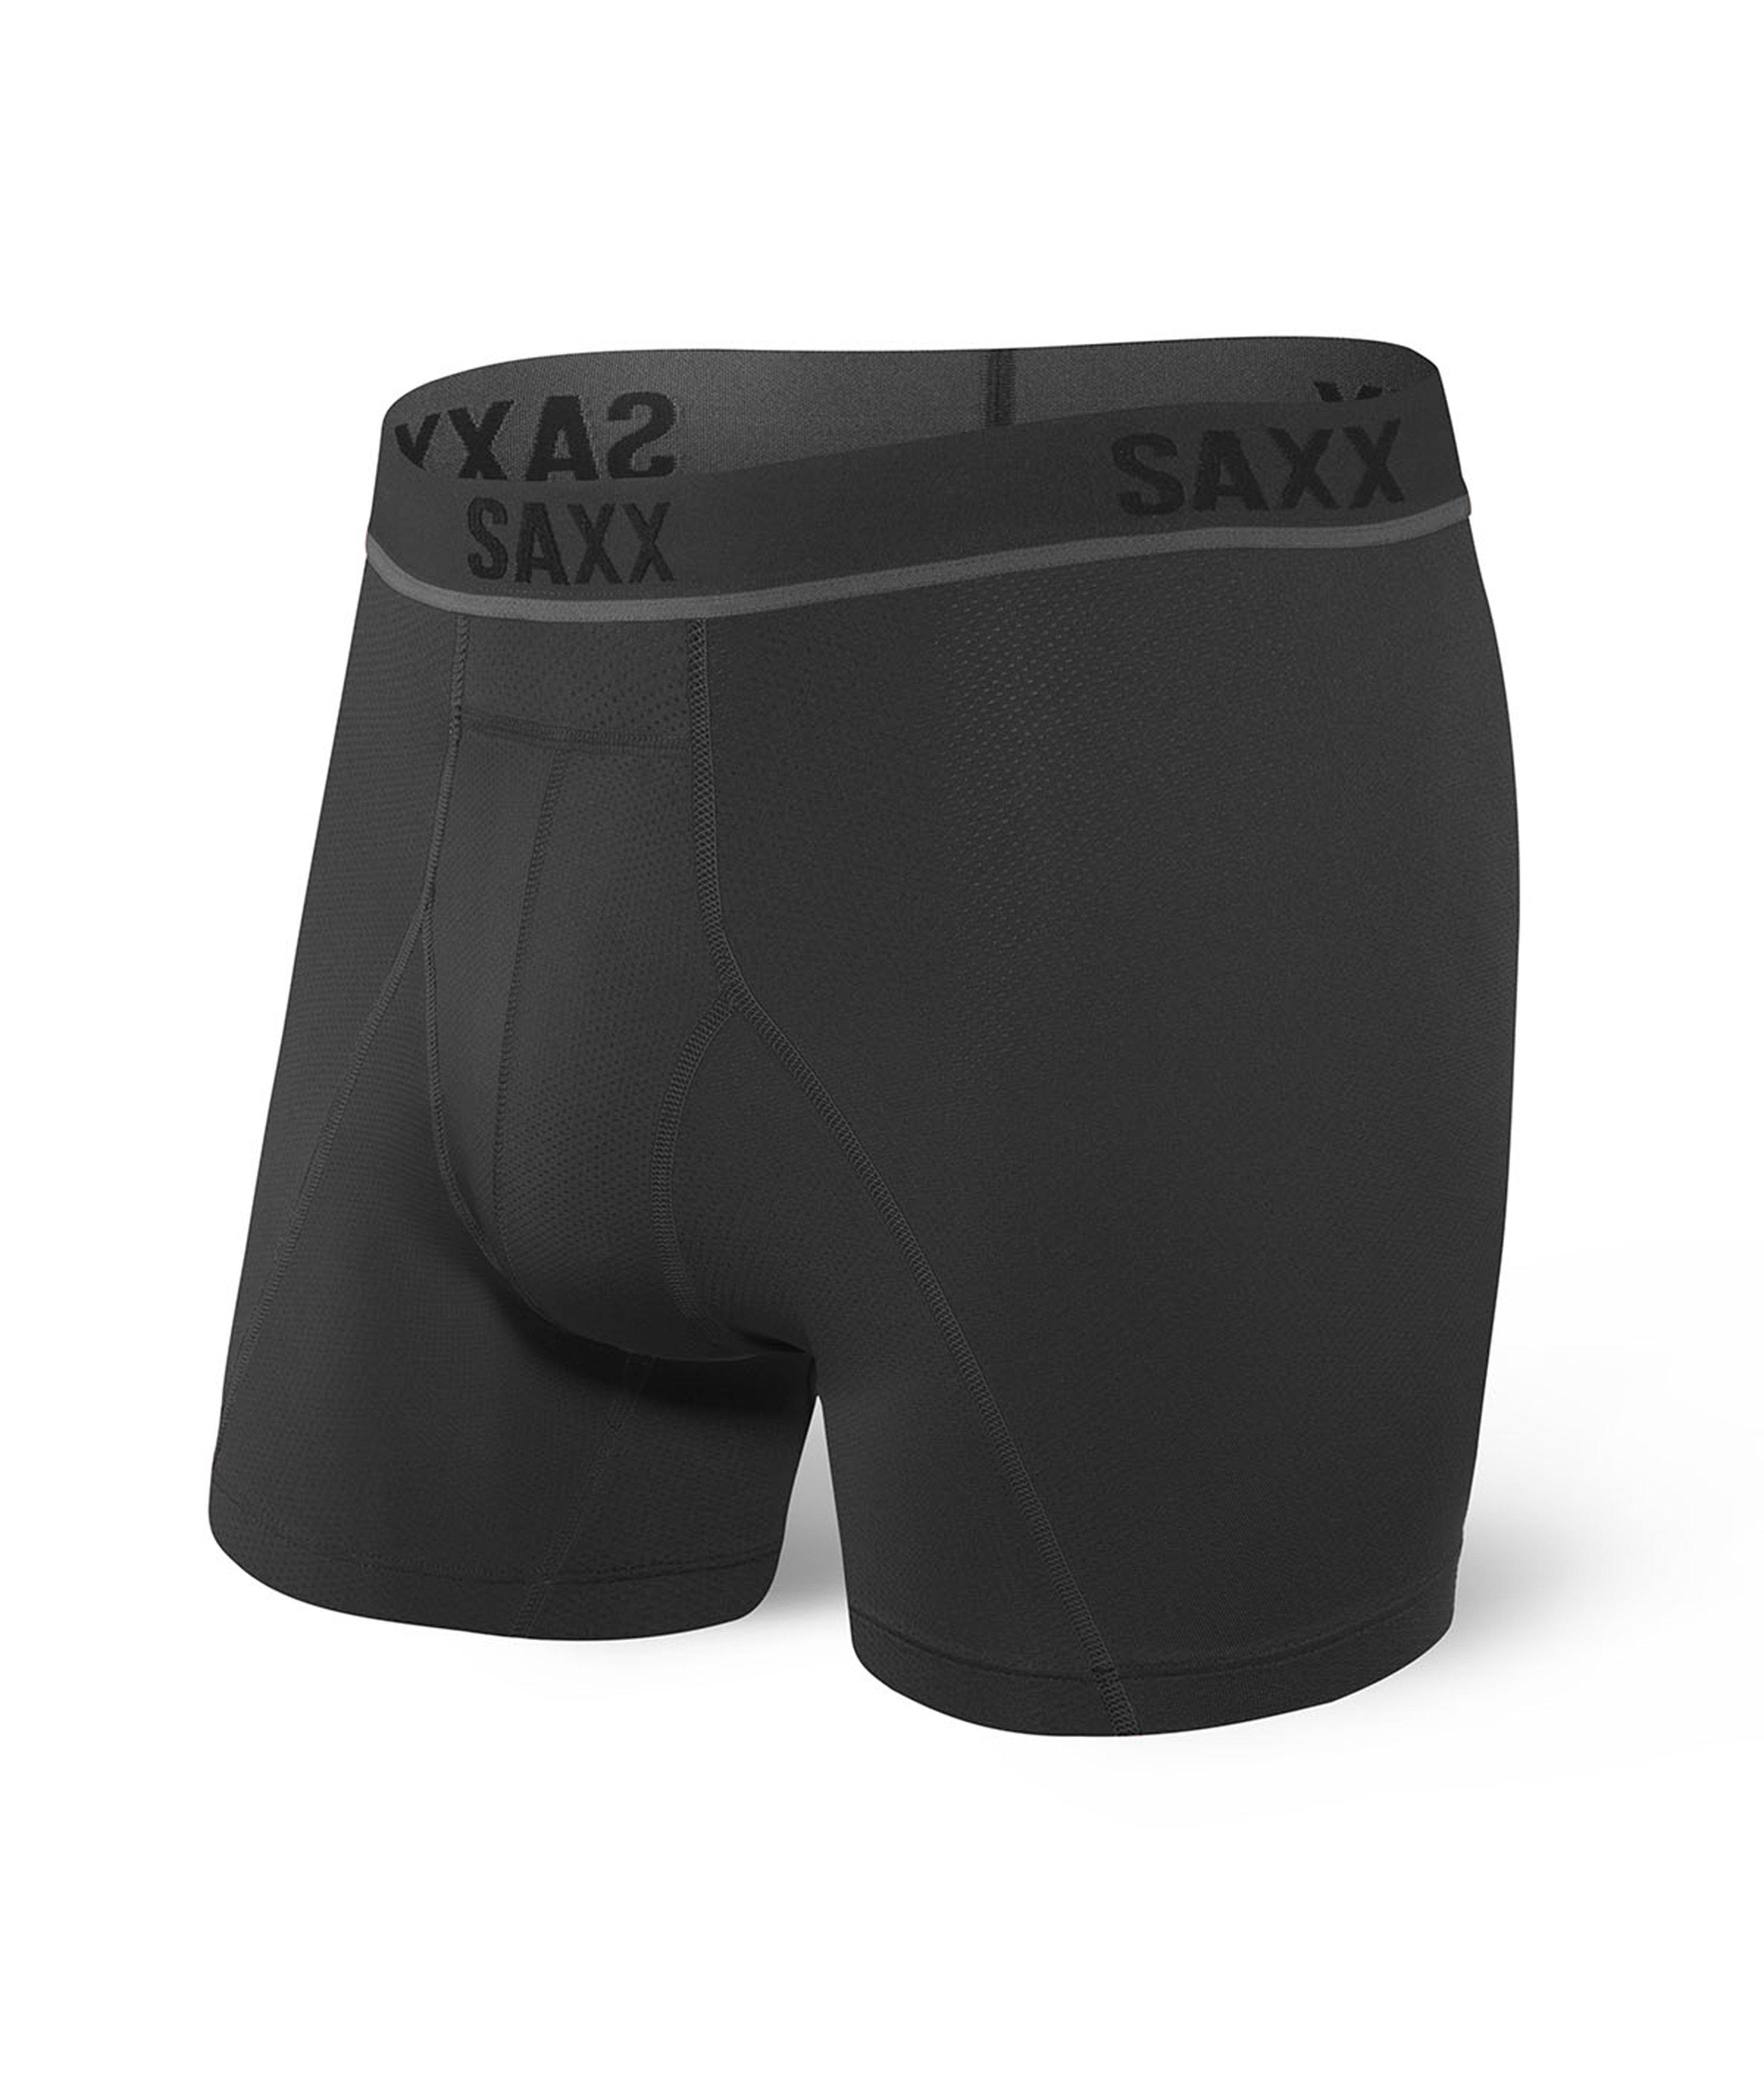 Kinetic HD Boxer Briefs image 0